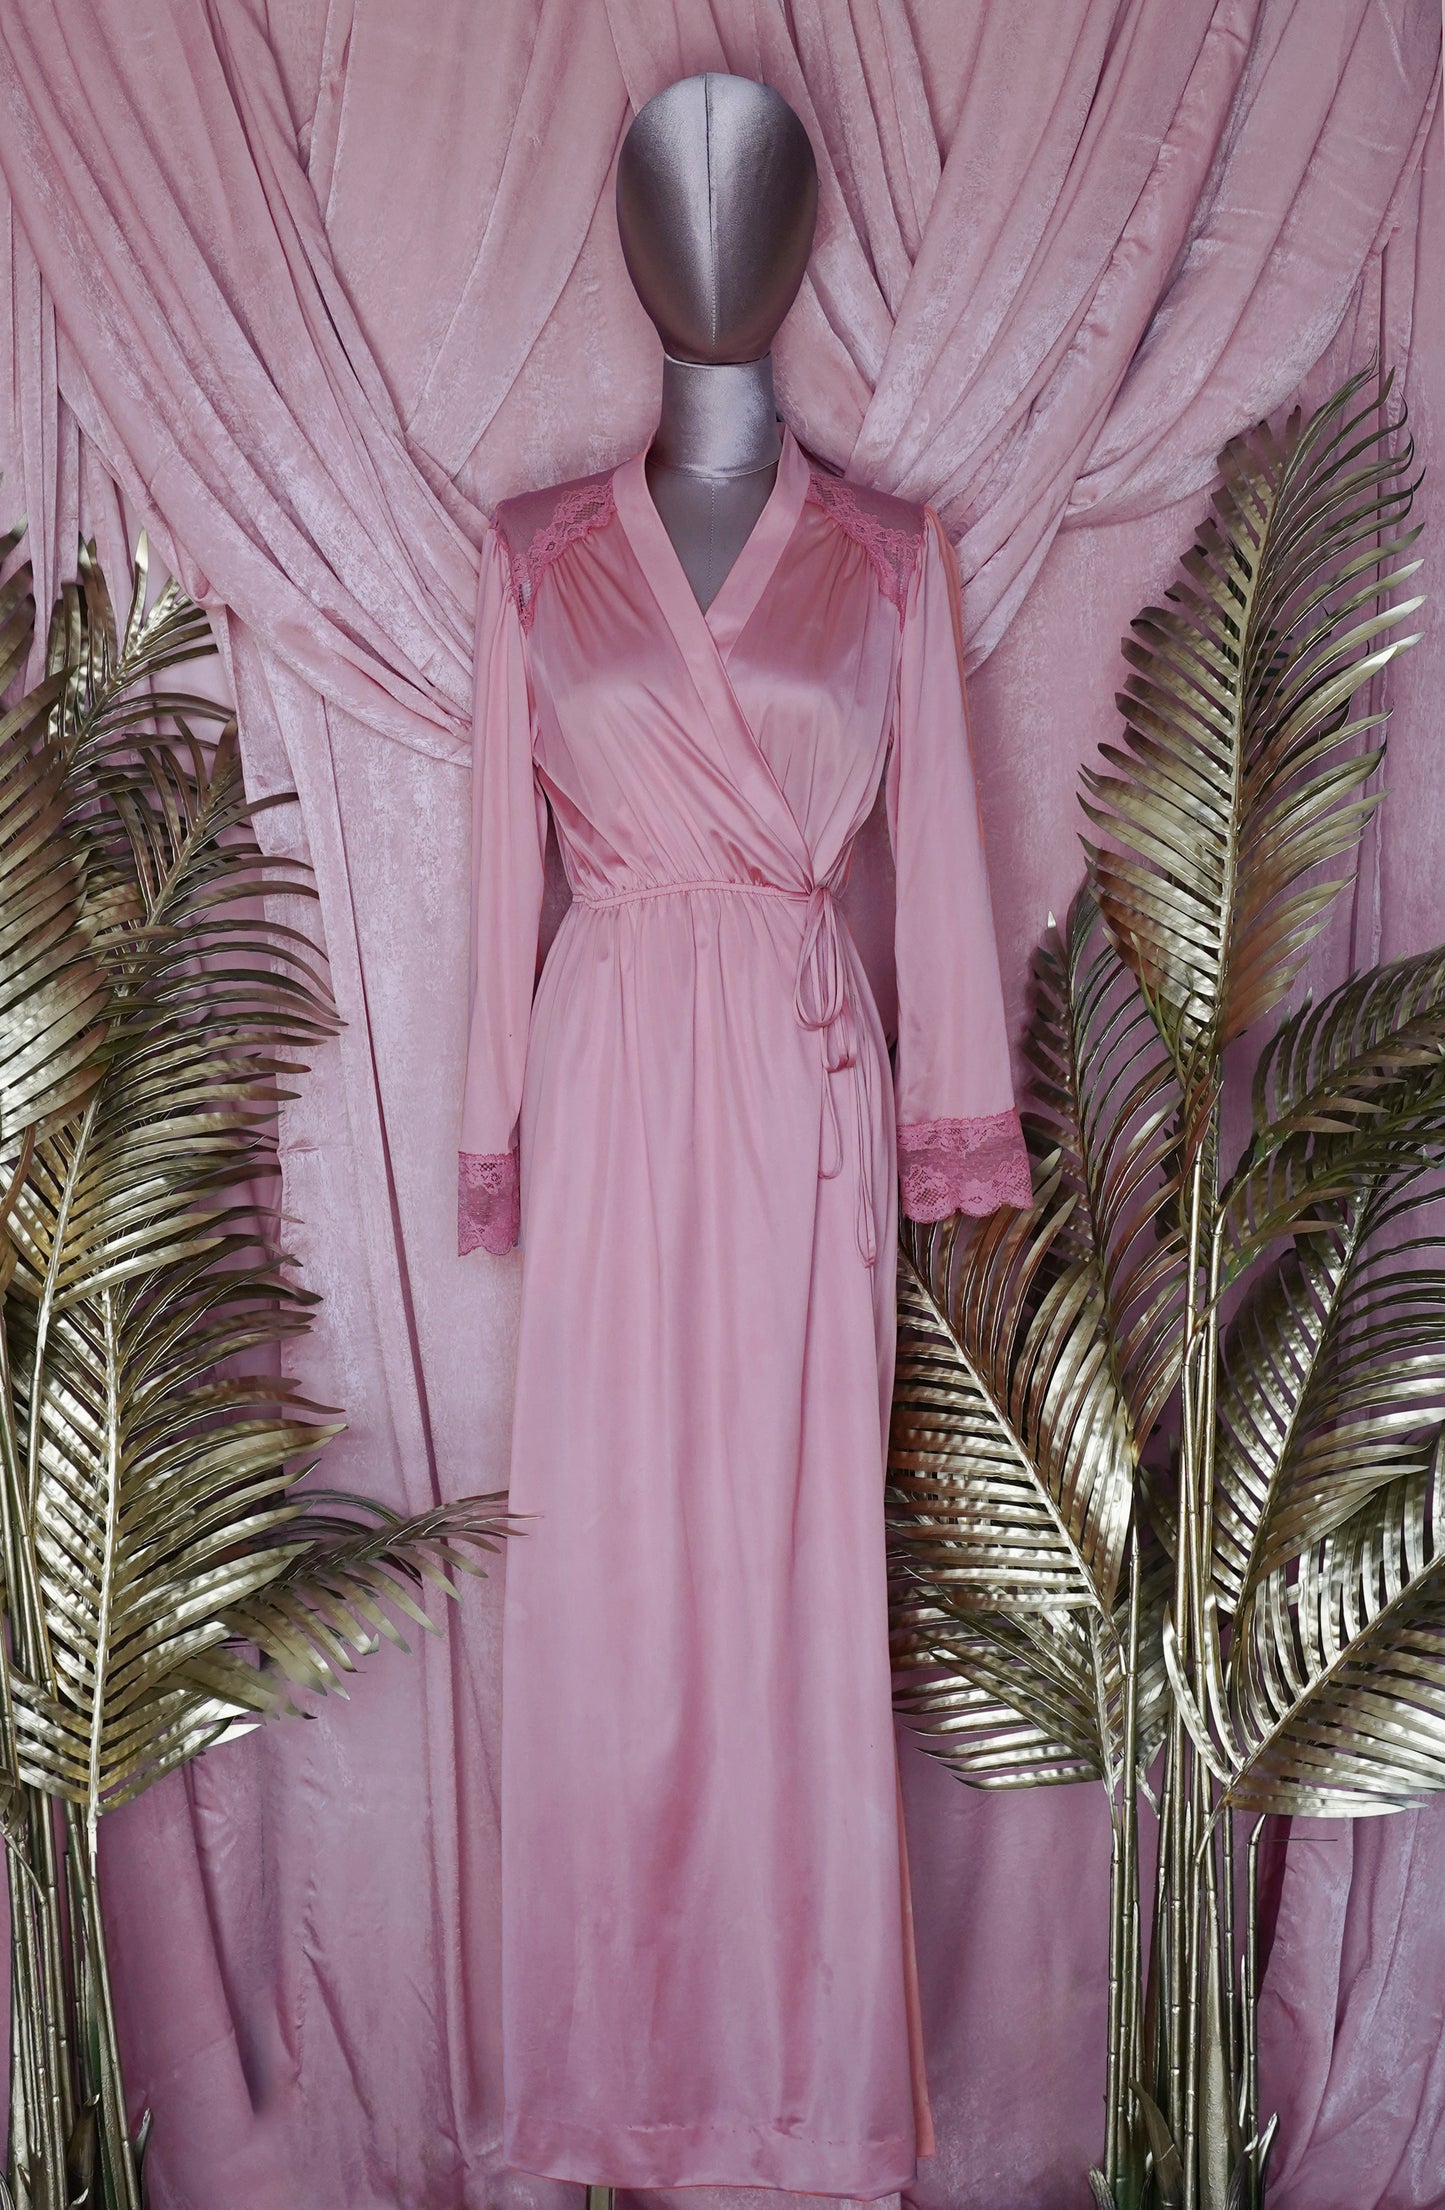 1960s Vintage Pink Lace robe